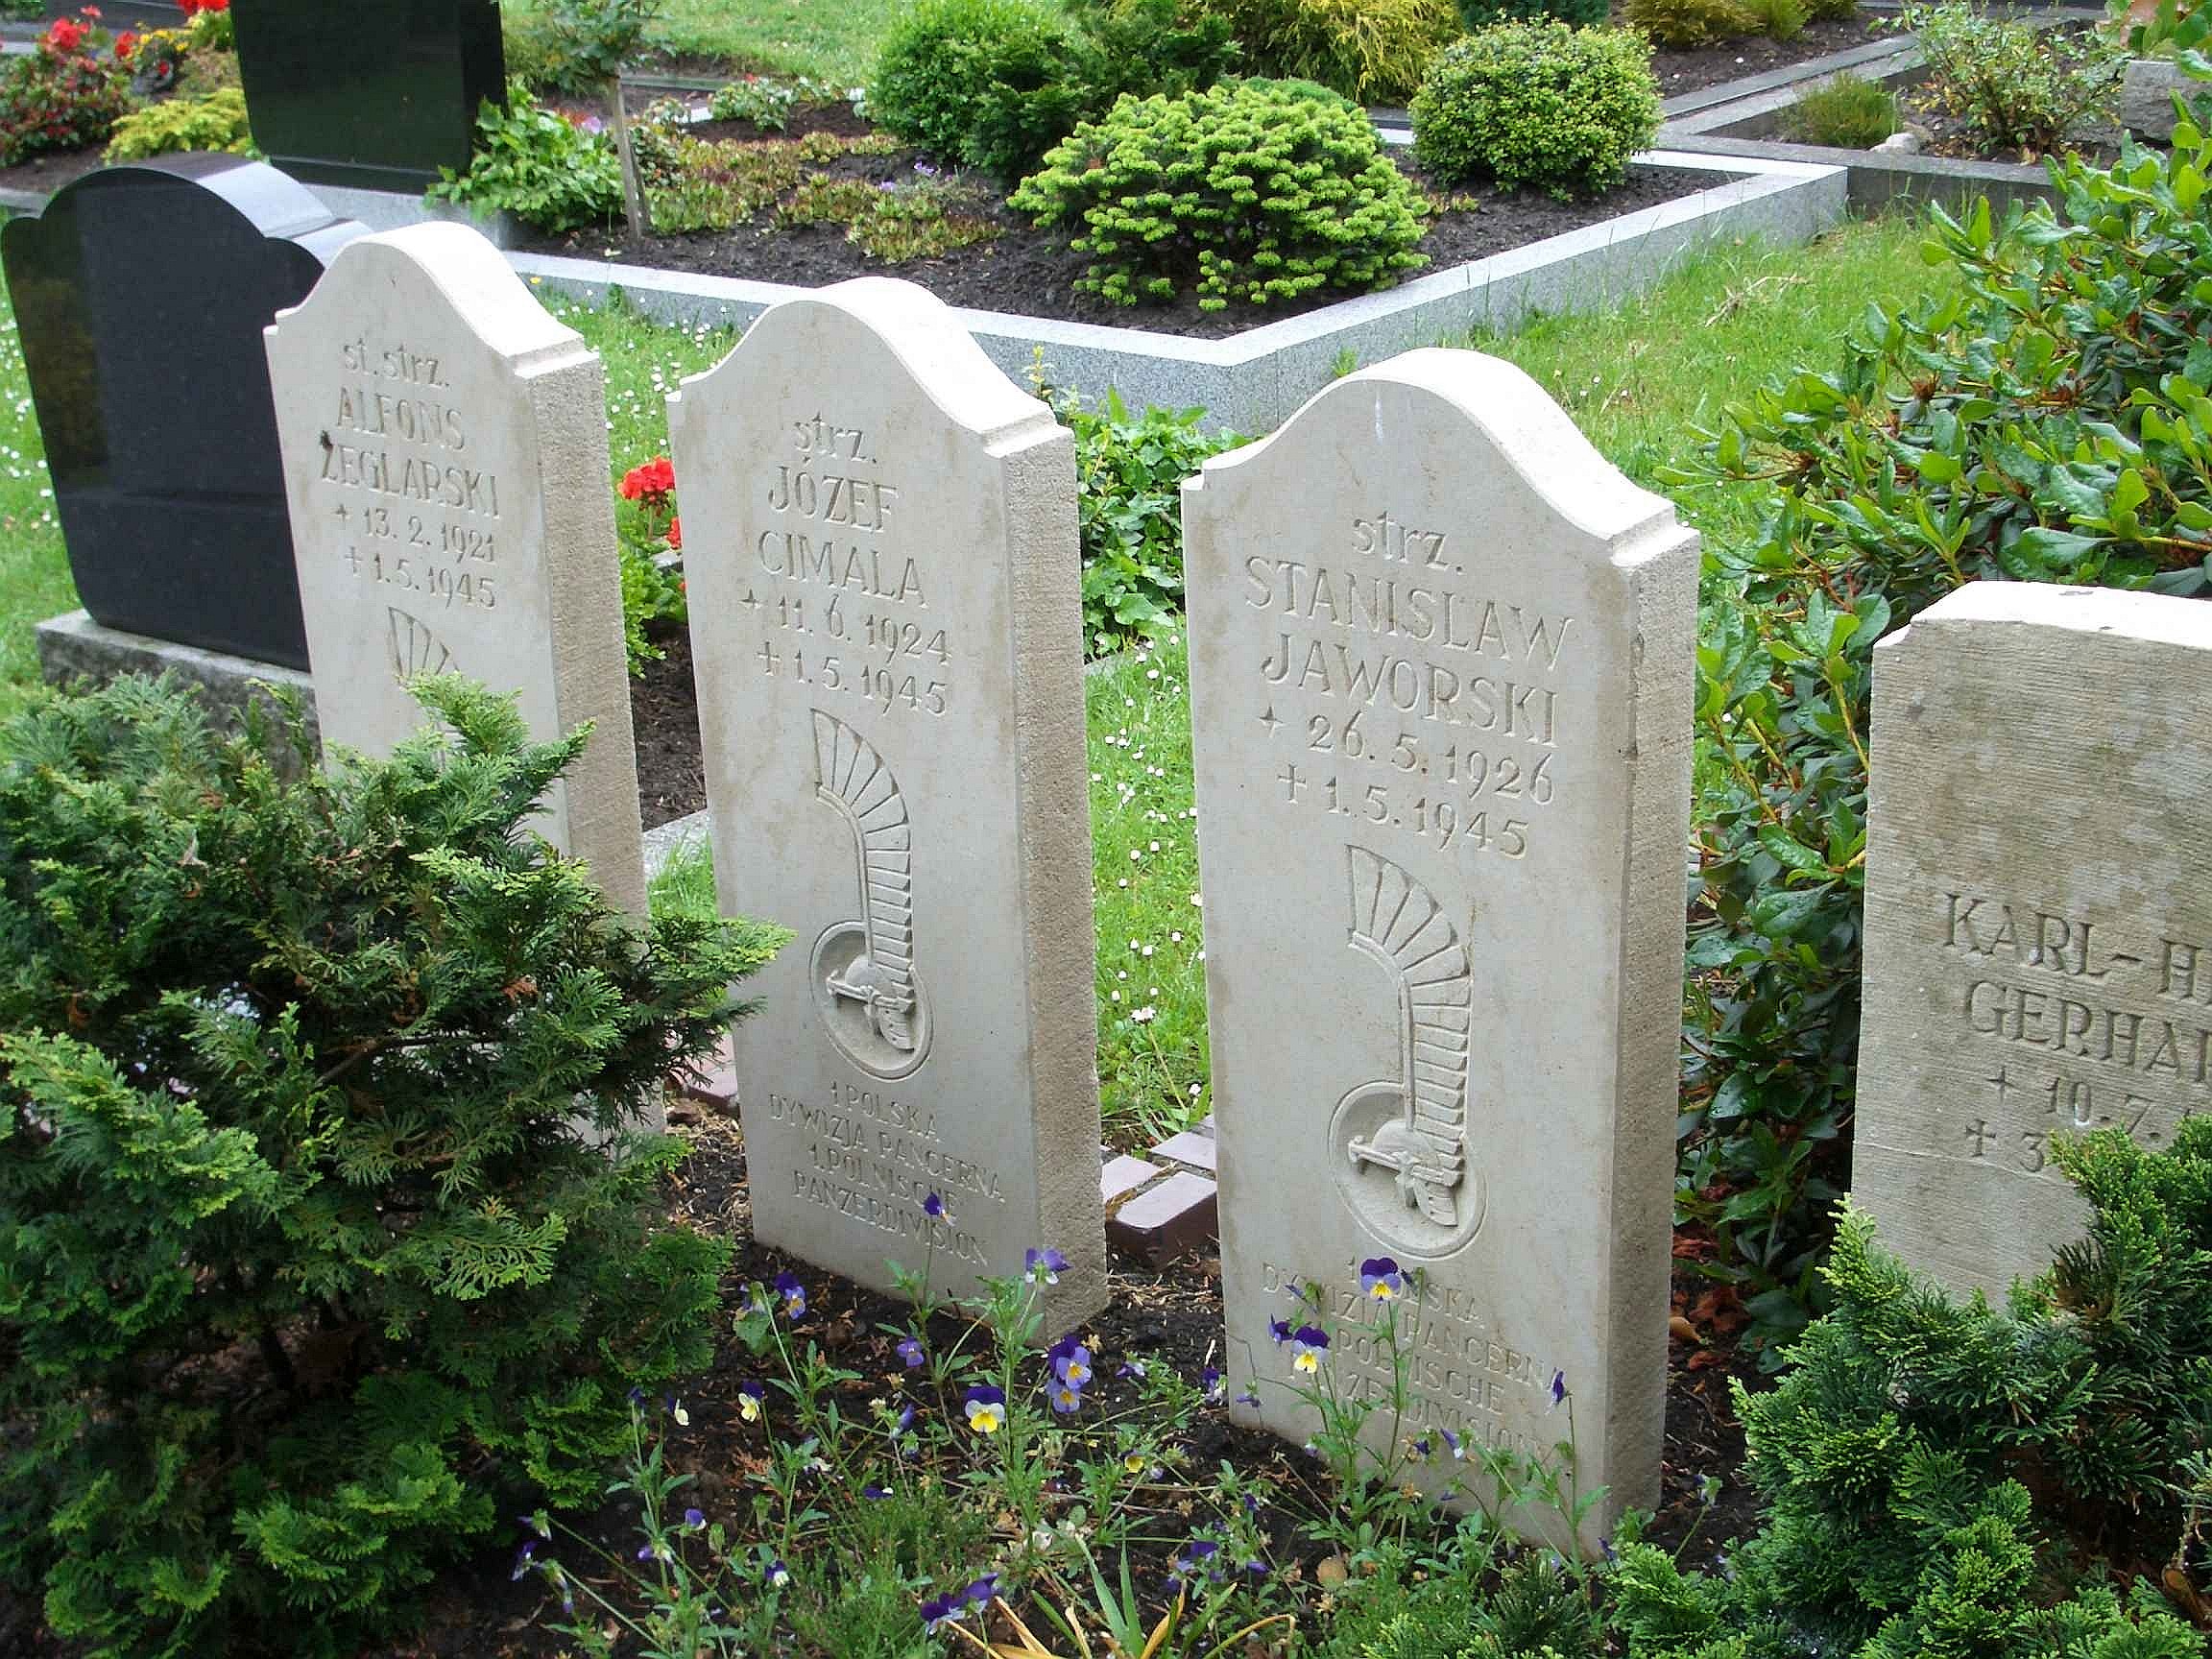 Graves of the three polish soldiers from the left